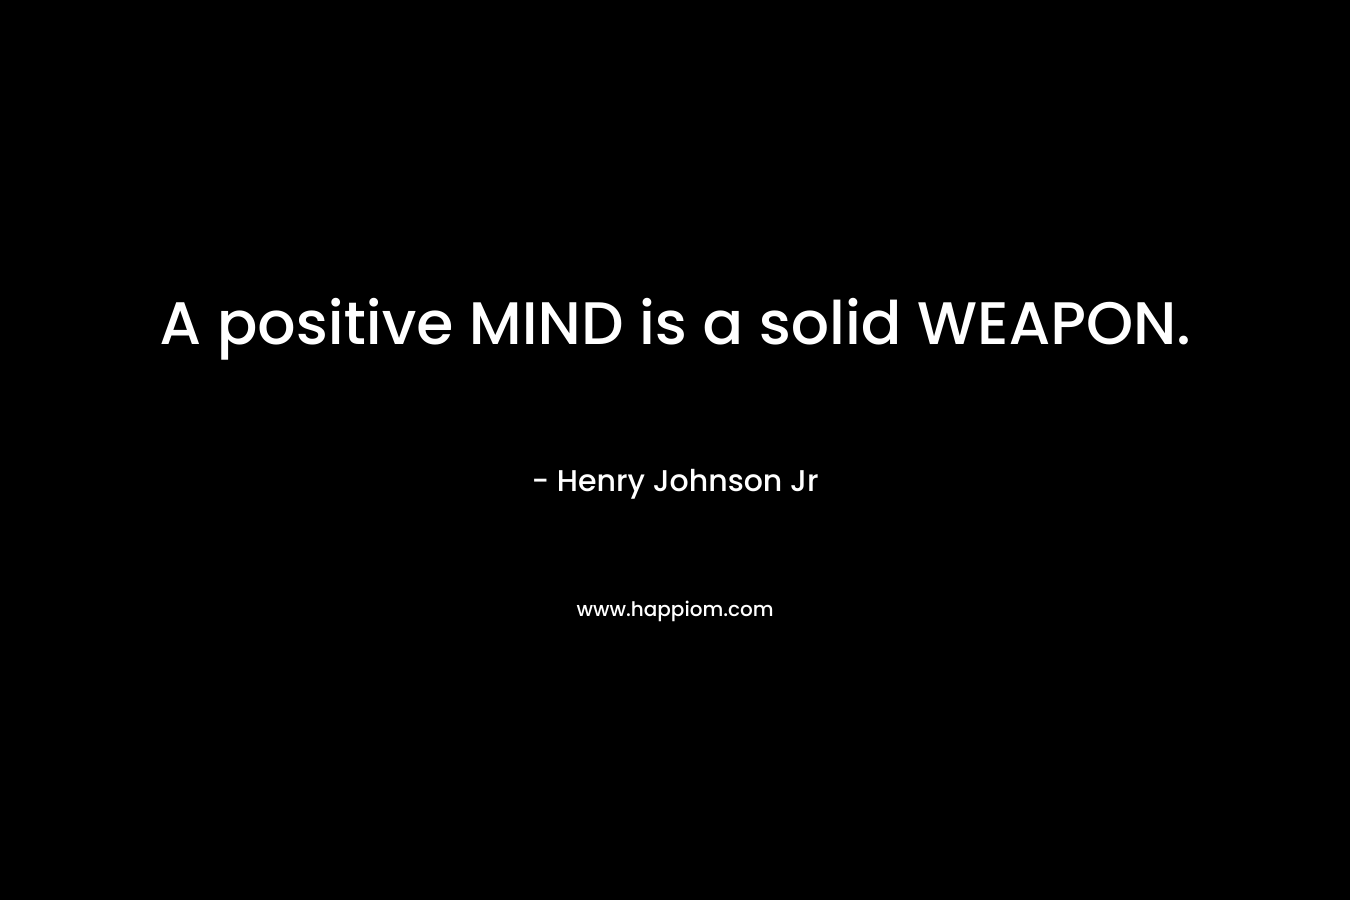 A positive MIND is a solid WEAPON. – Henry Johnson Jr